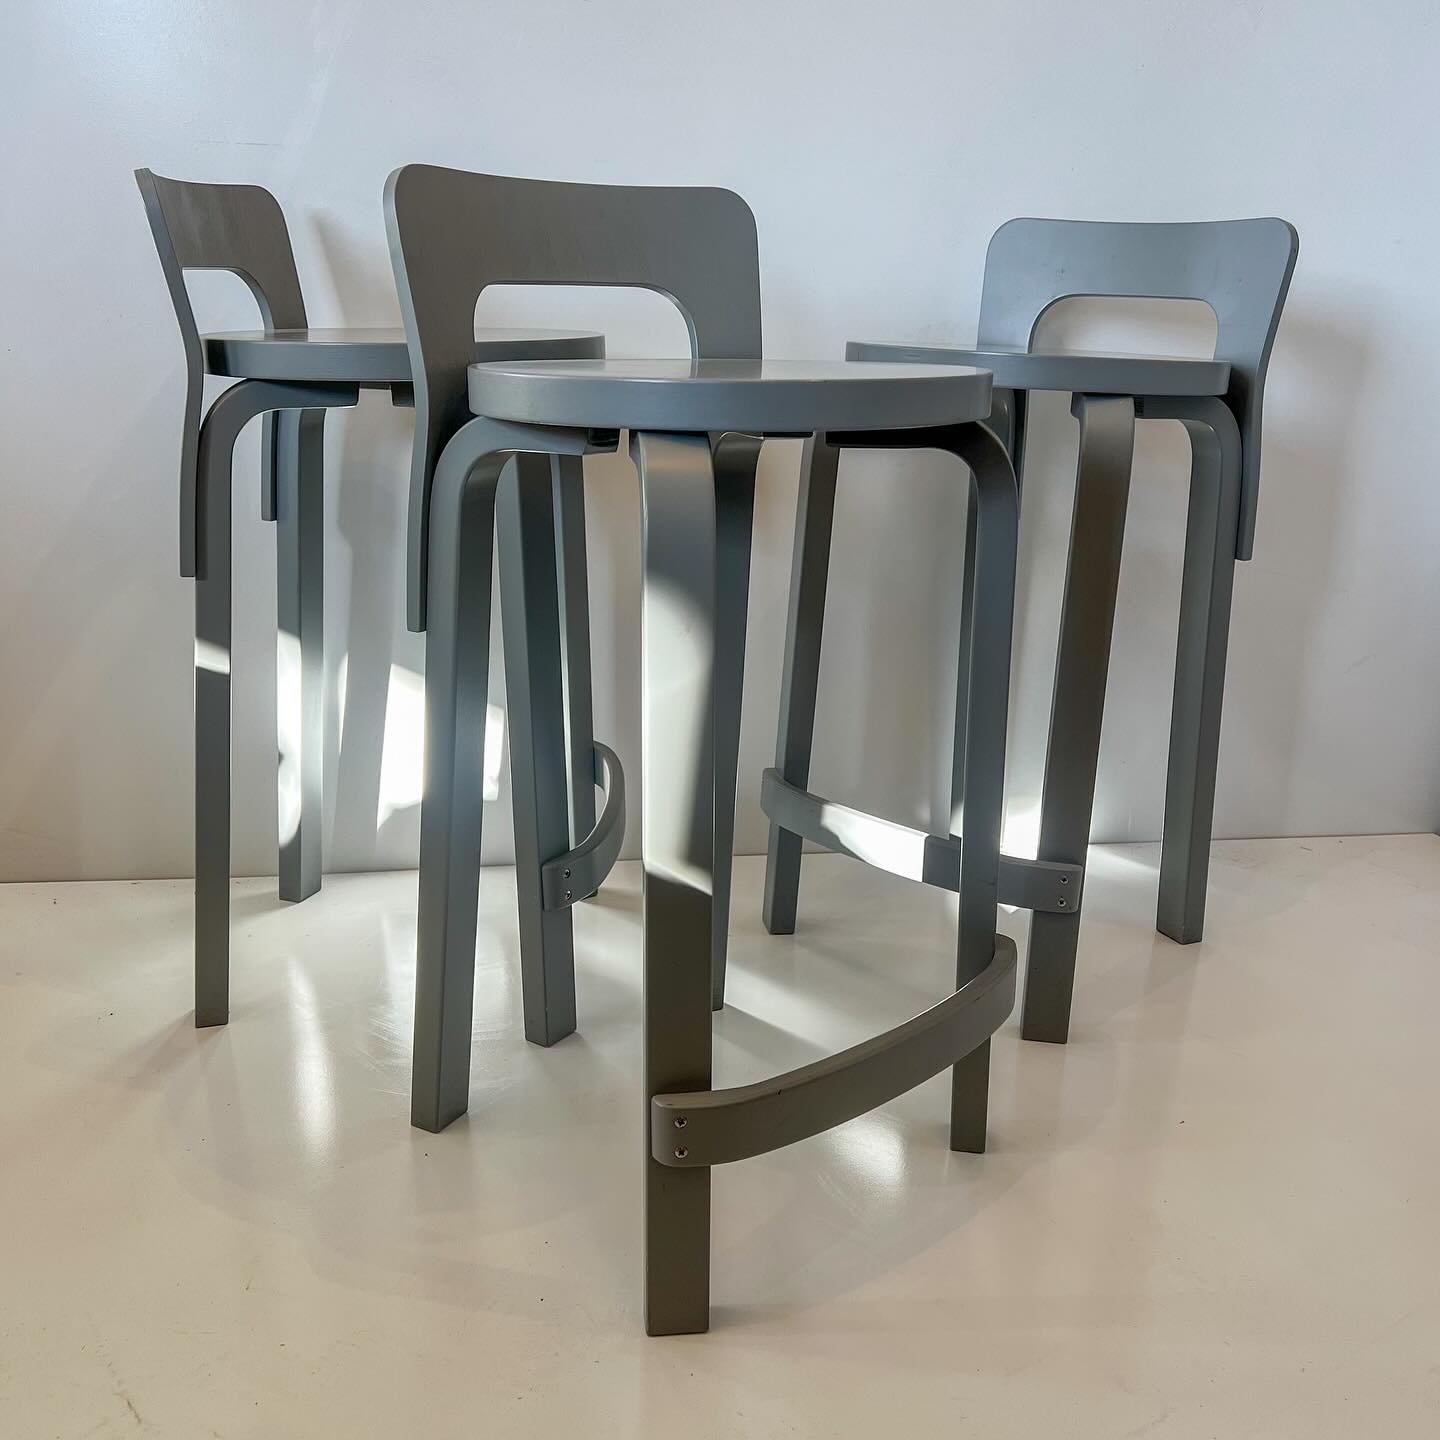 Currently 7 available.

Alvar Aalto High Chair K65 manufactured by Artek of Finland- in a grey finish.

All details including price and measurements via tenpastonevintage.com.au - link in bio 

#aalvaralto #artek #k65stool